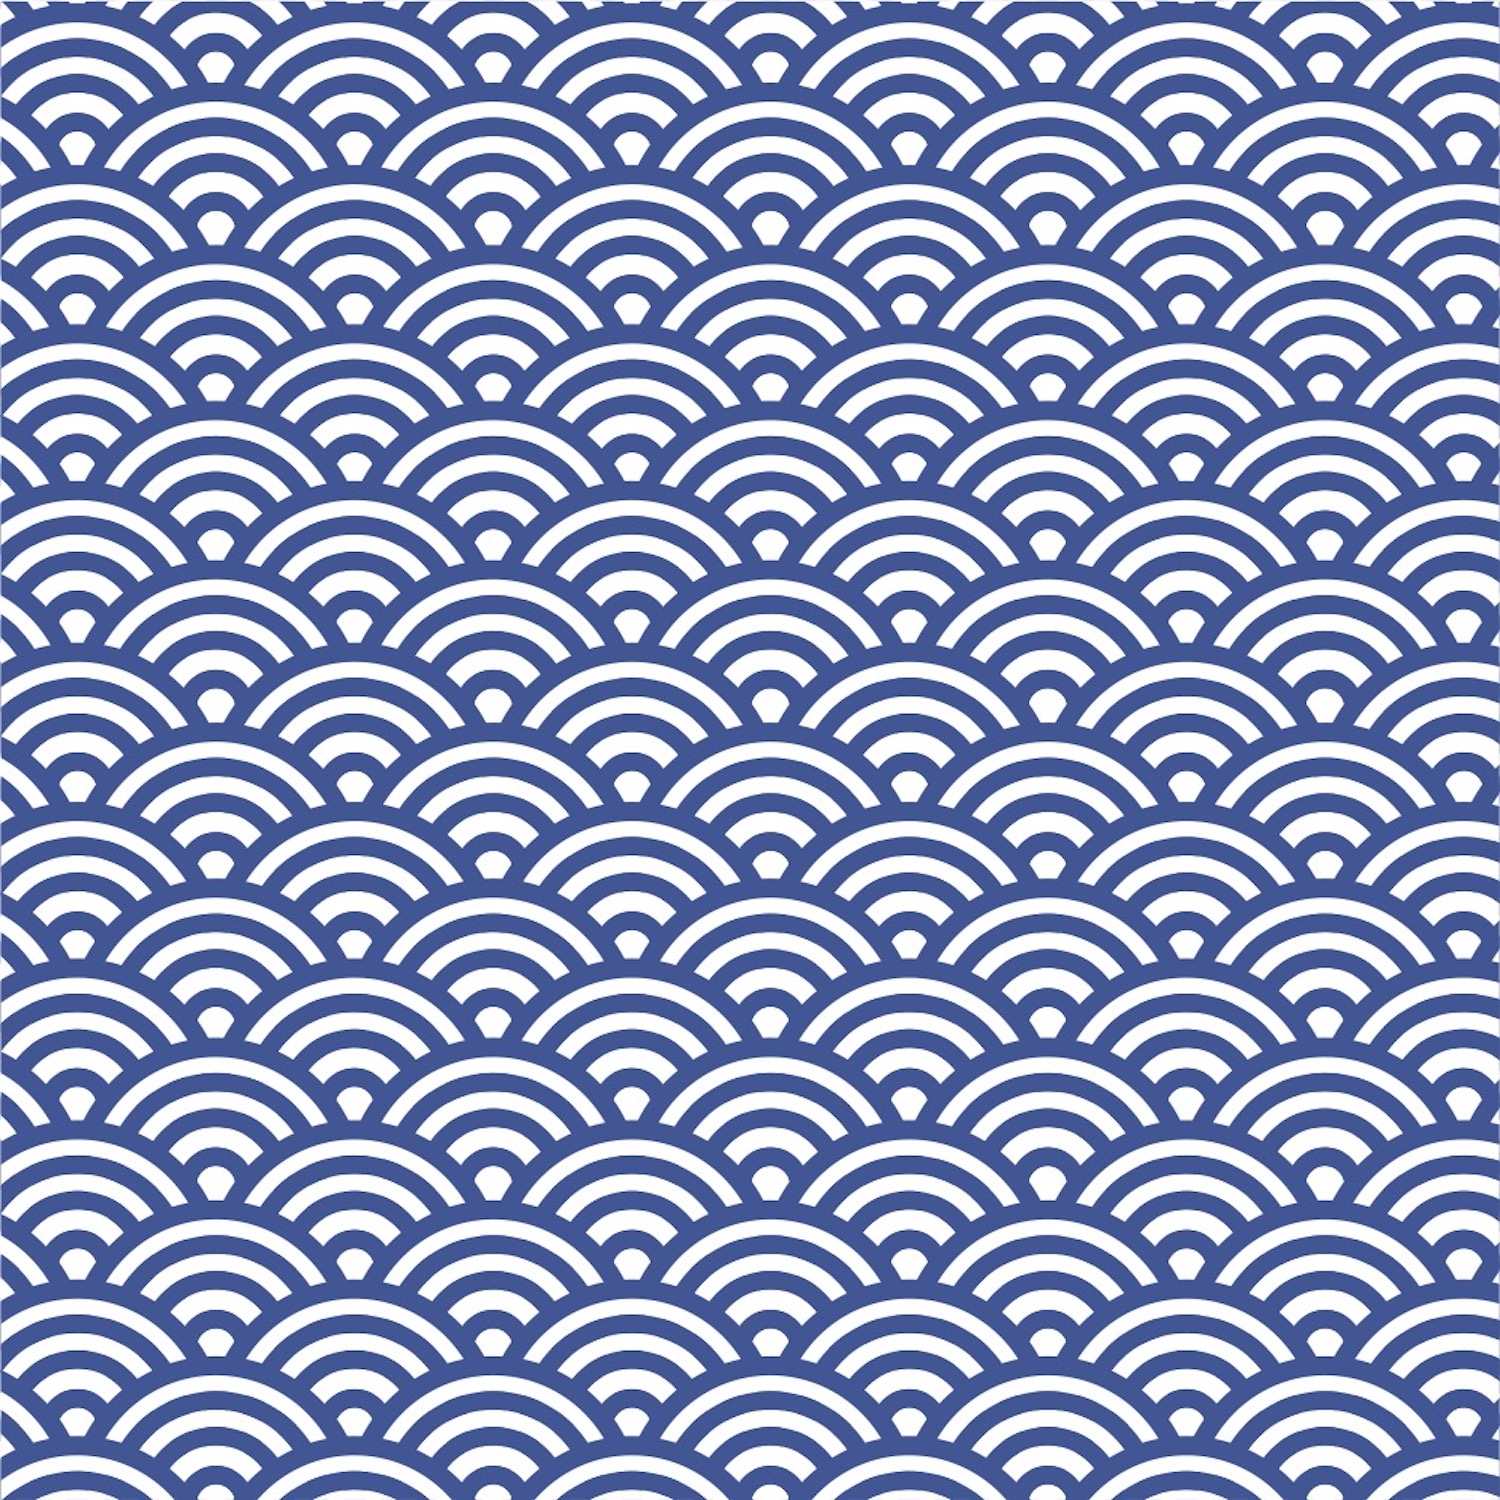 seigaiha pattern, repeated Japanese wave pattern in blue and white